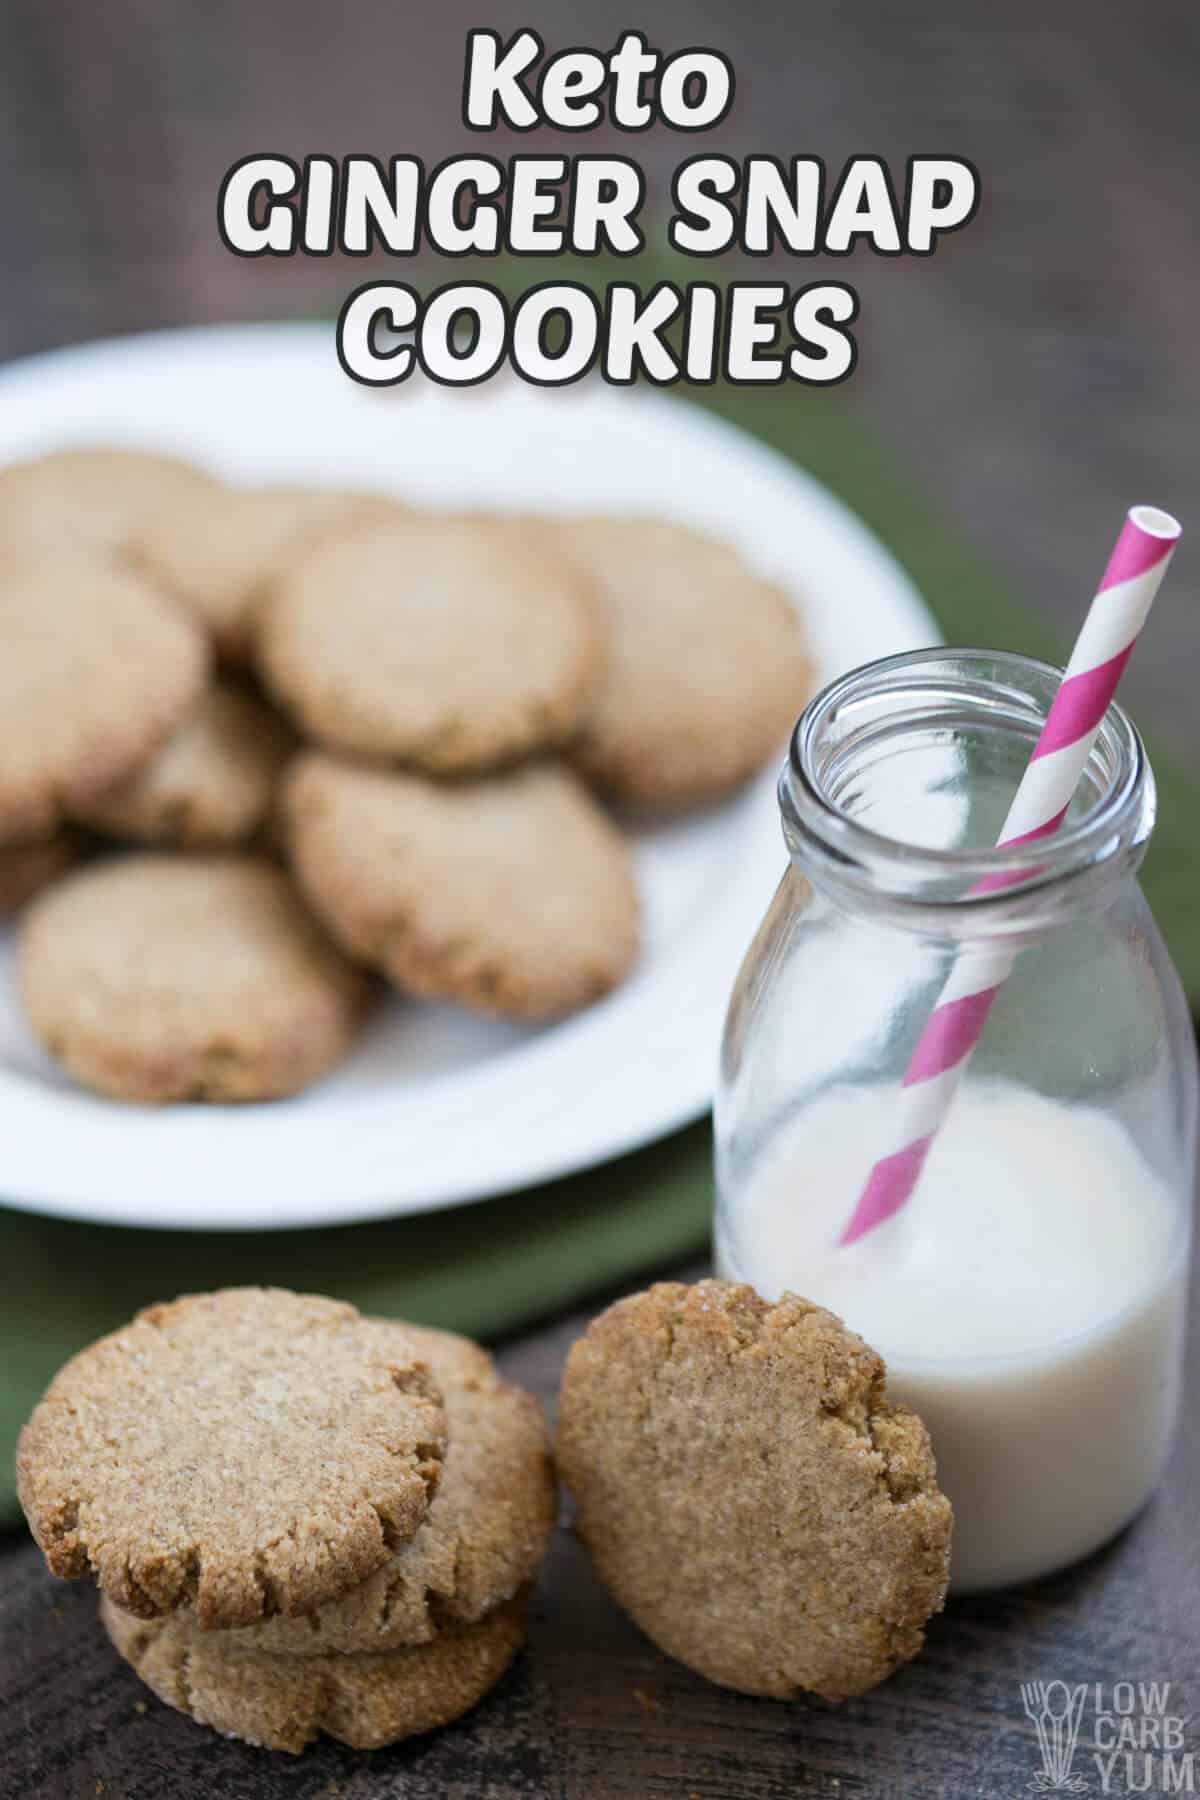 keto ginger snaps cookie recipe featured image with text overlay